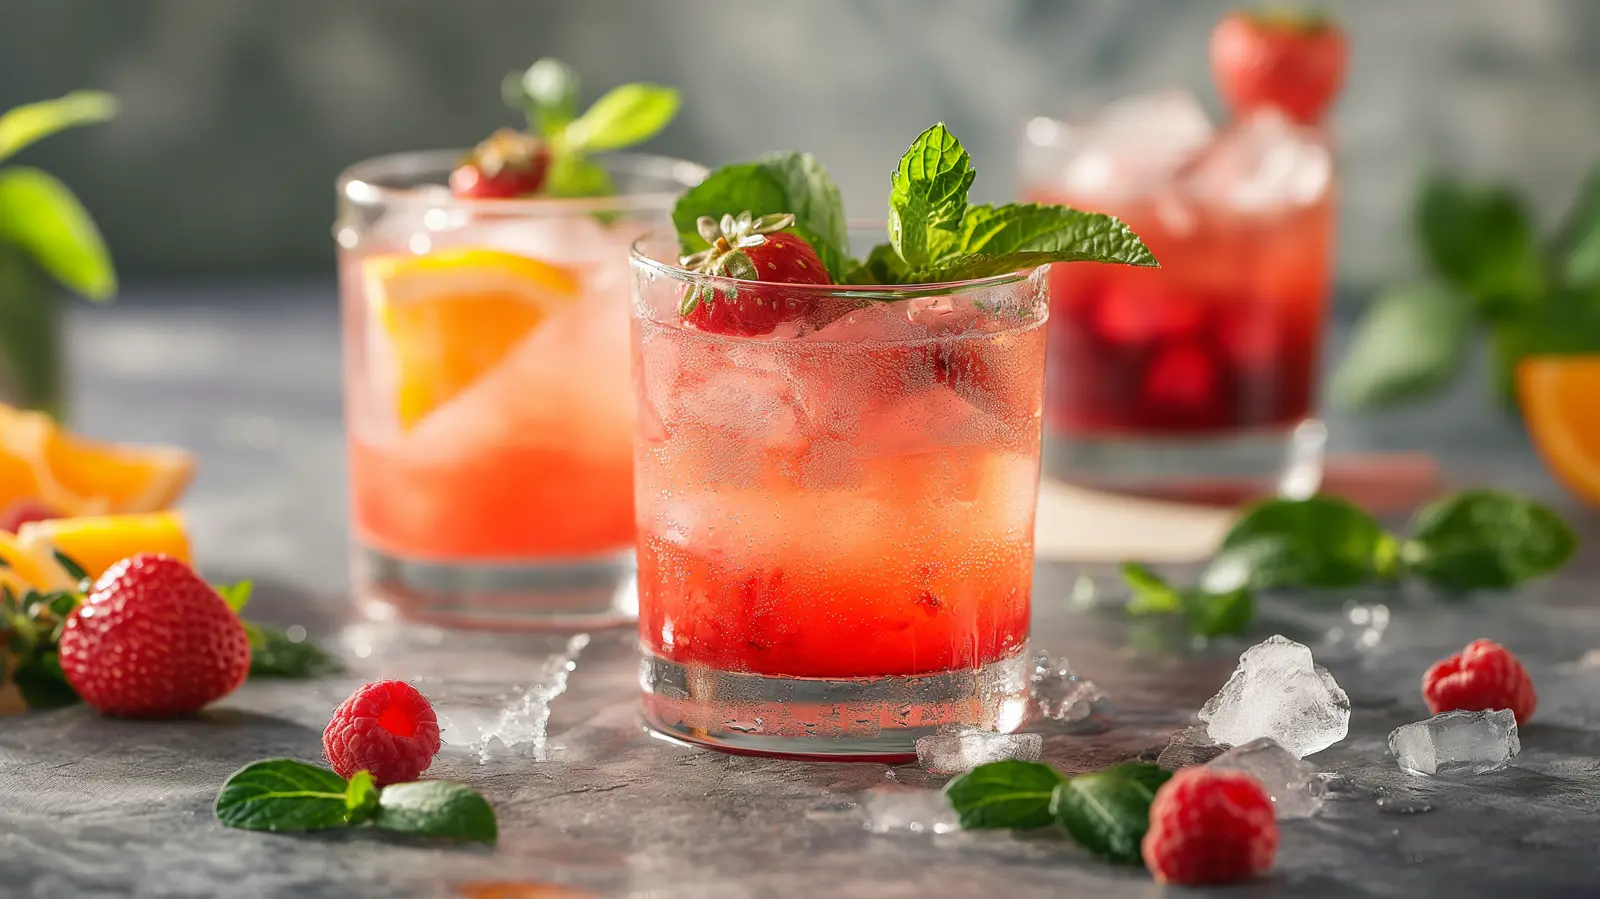 Refreshing Non-Alcoholic Drinks for Summer